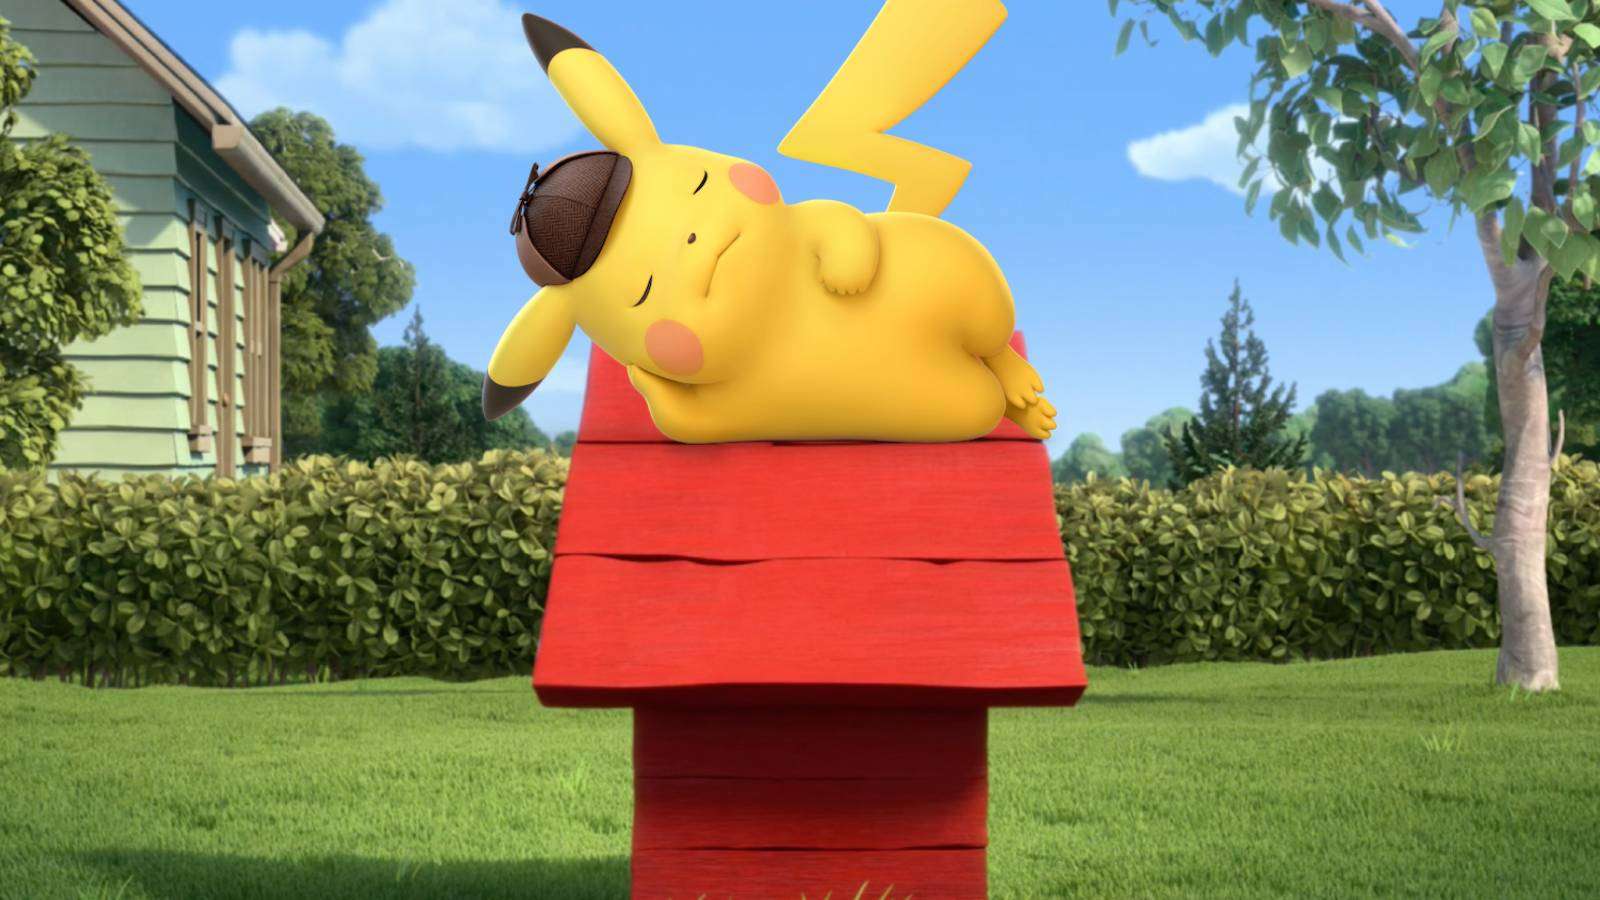 Pikachu sleeps on a red dog house, similar to the one used by Snoopy